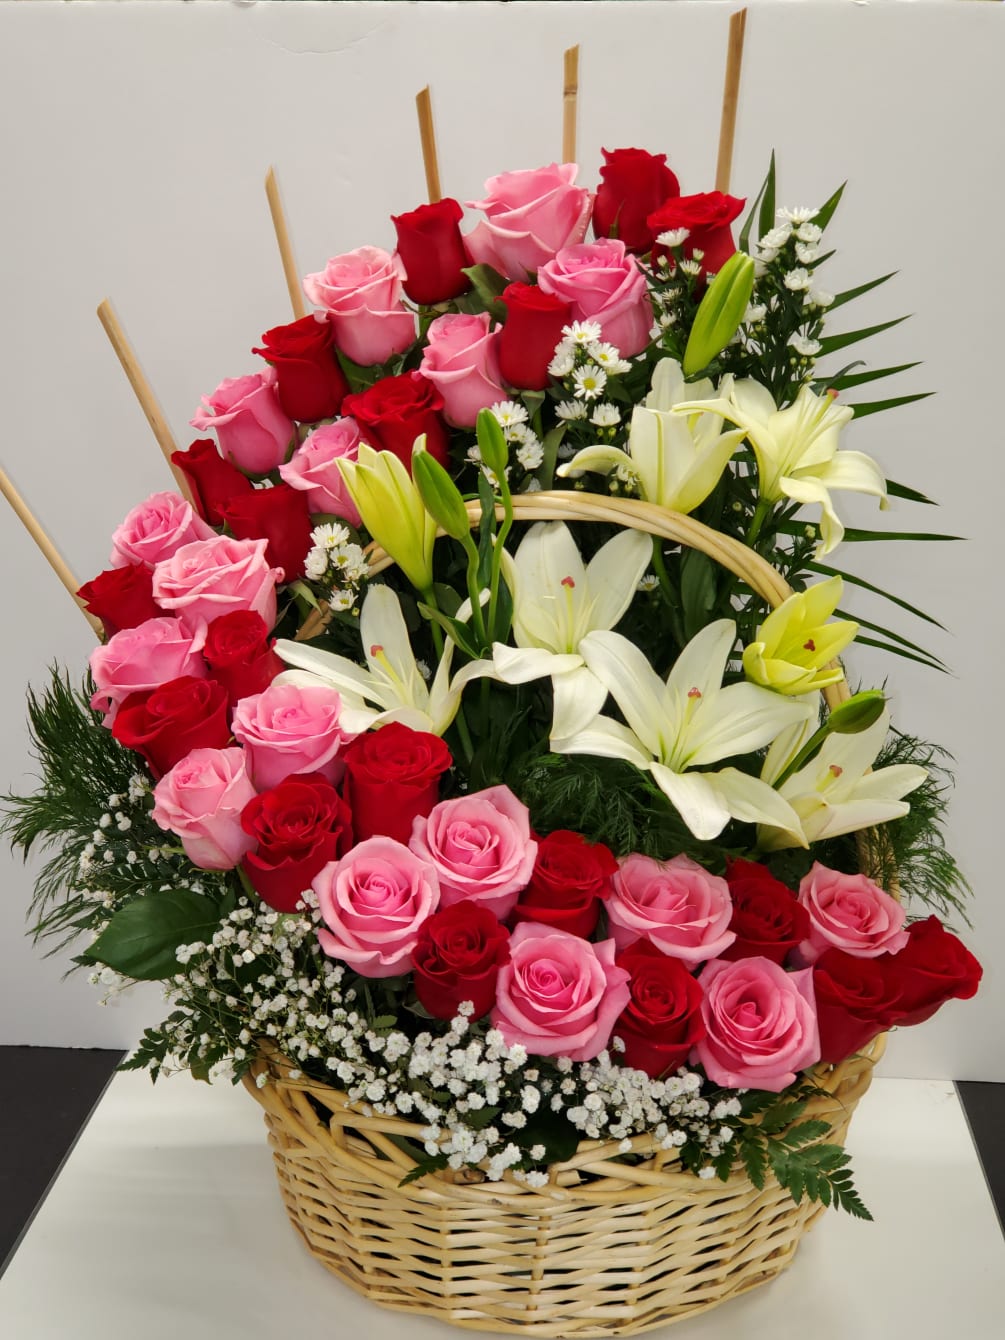 With pink and red roses 